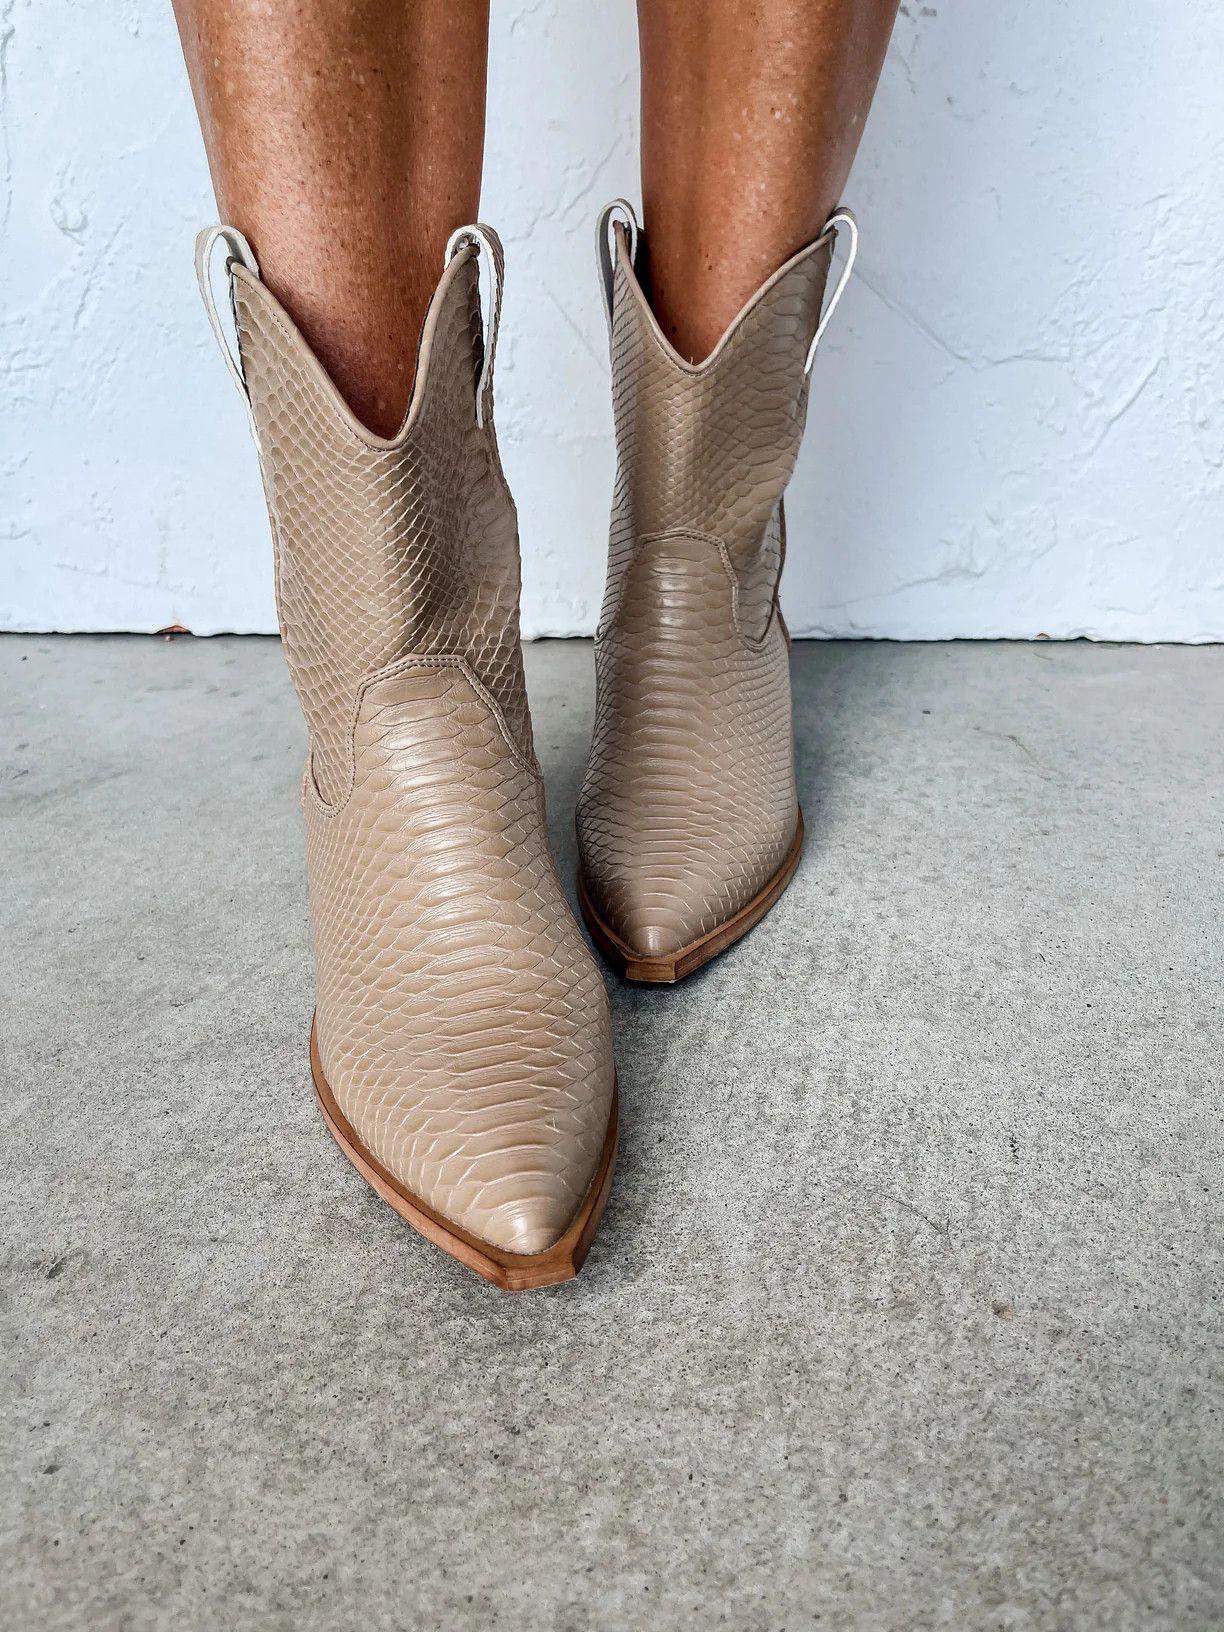 [ShuShop] ZouZou Ankle Boot-Taupe Snake | Ruthie Grace